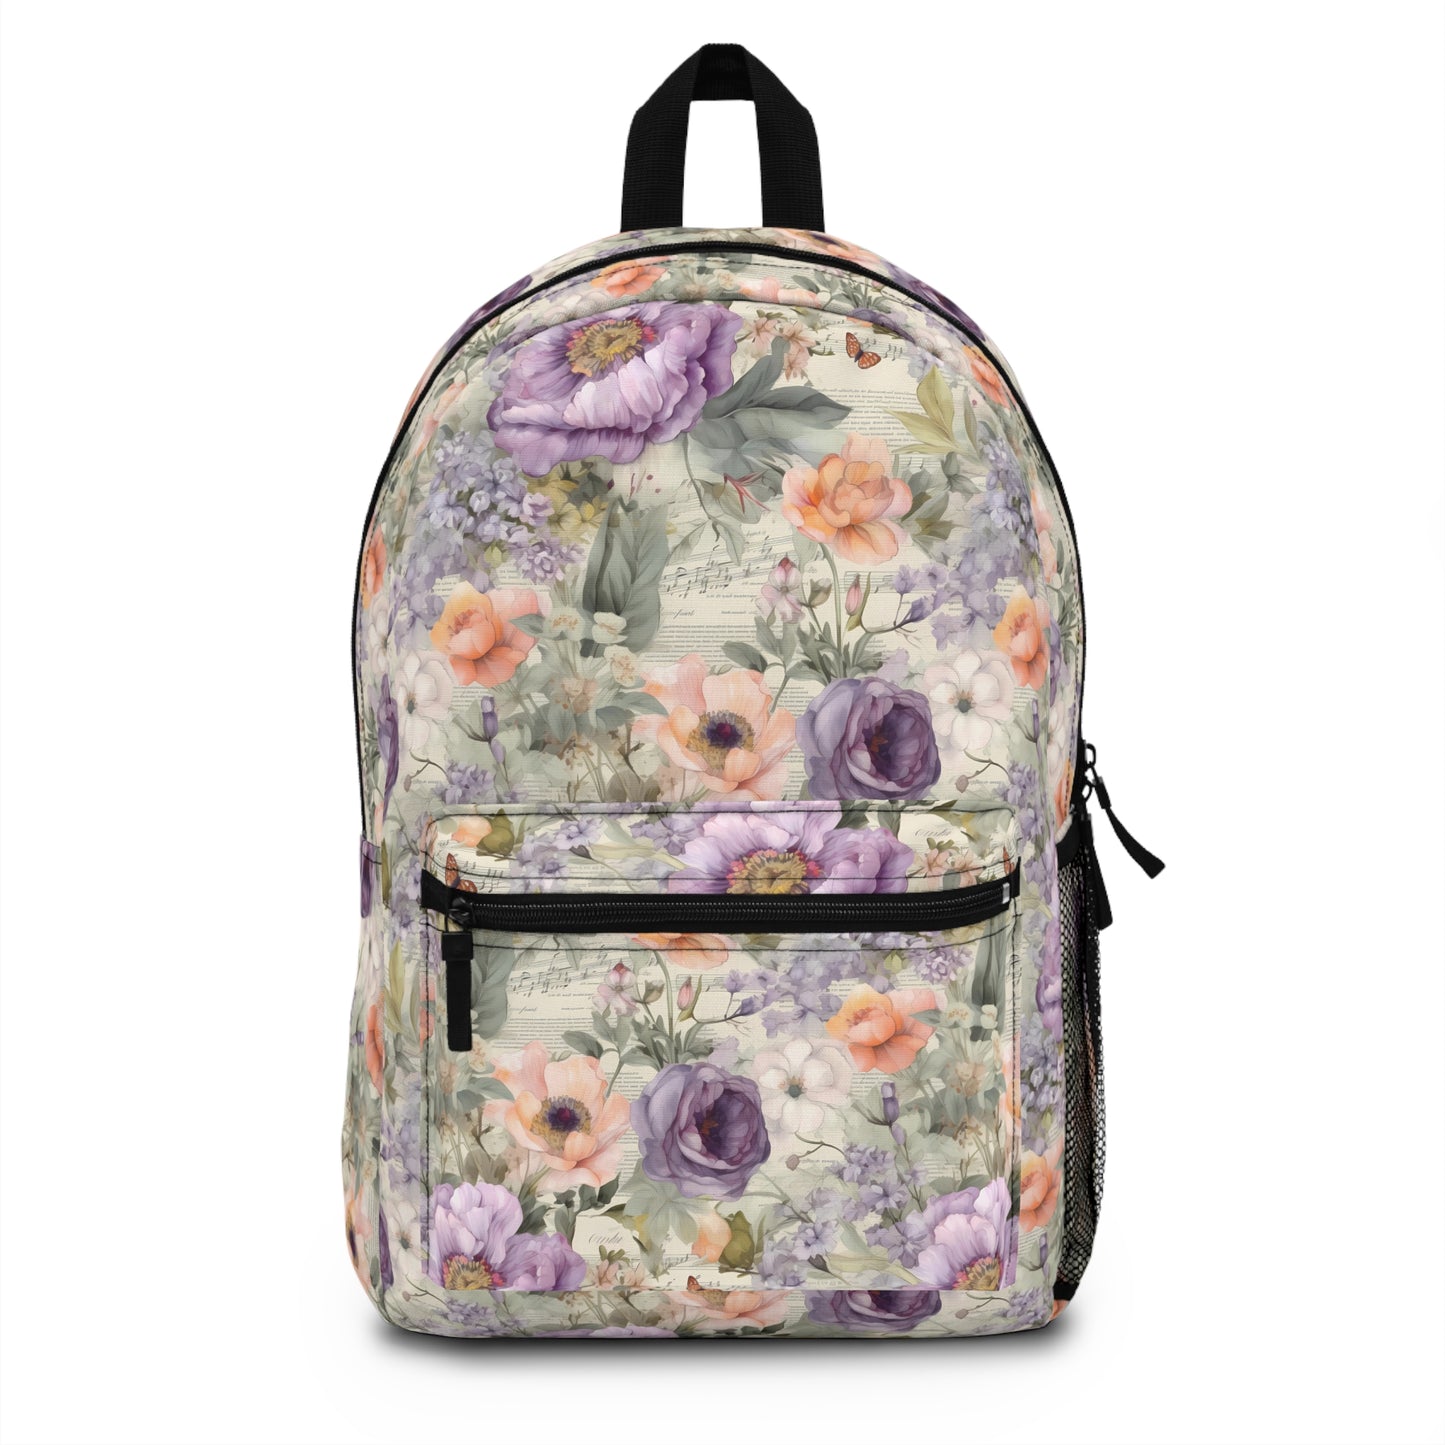 vintage floral backpack with orang and purple flowers and green leaves